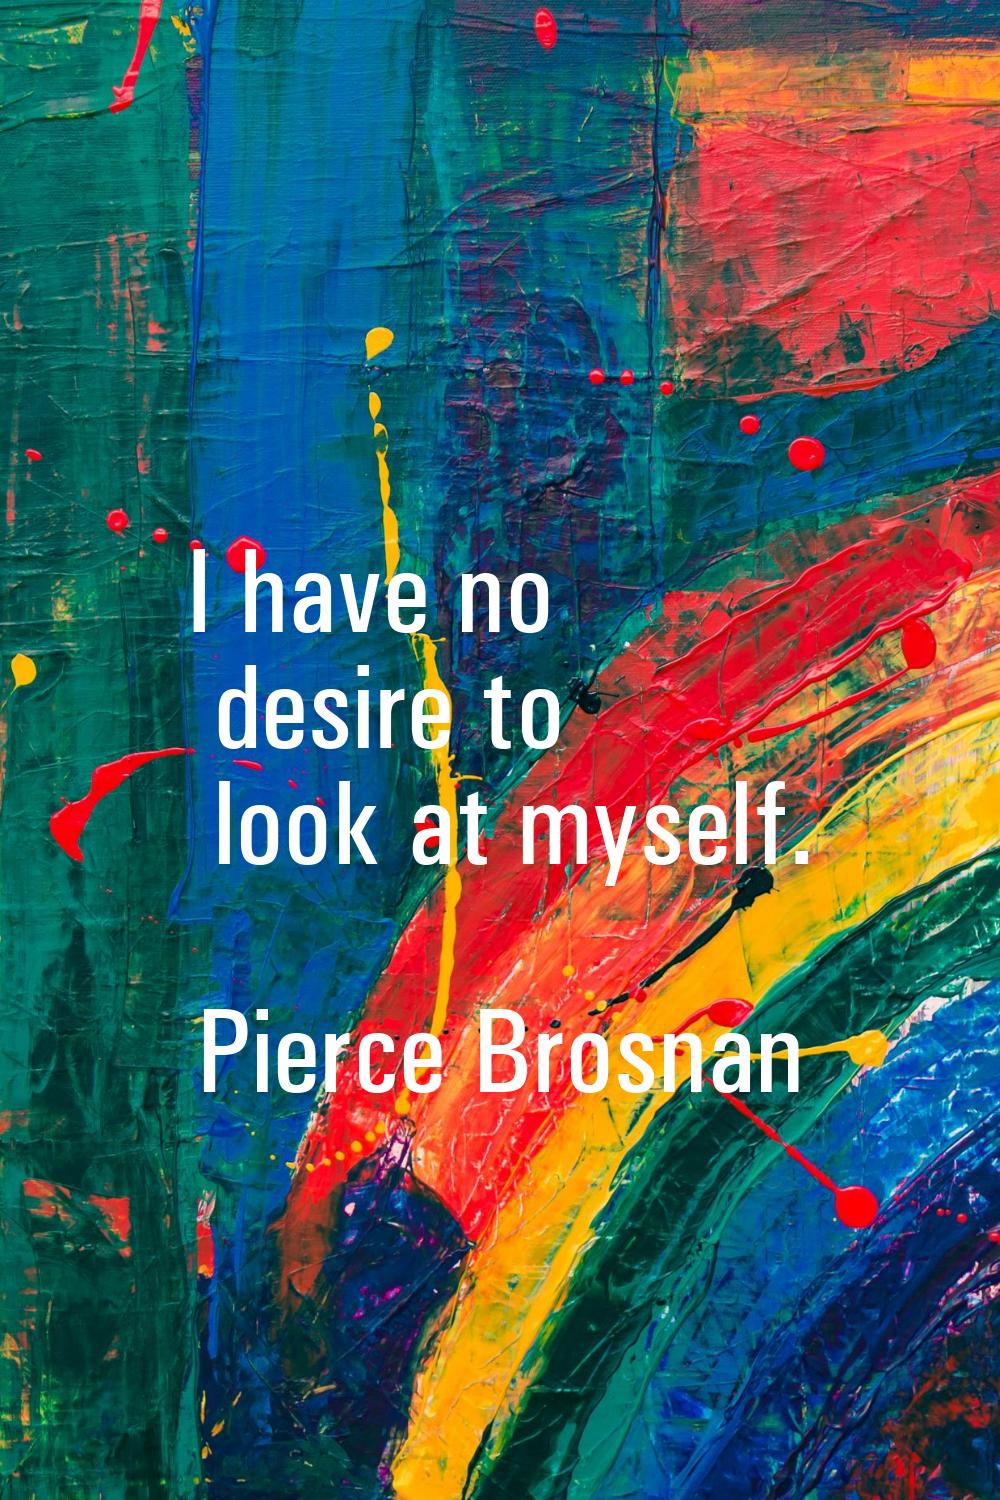 I have no desire to look at myself.